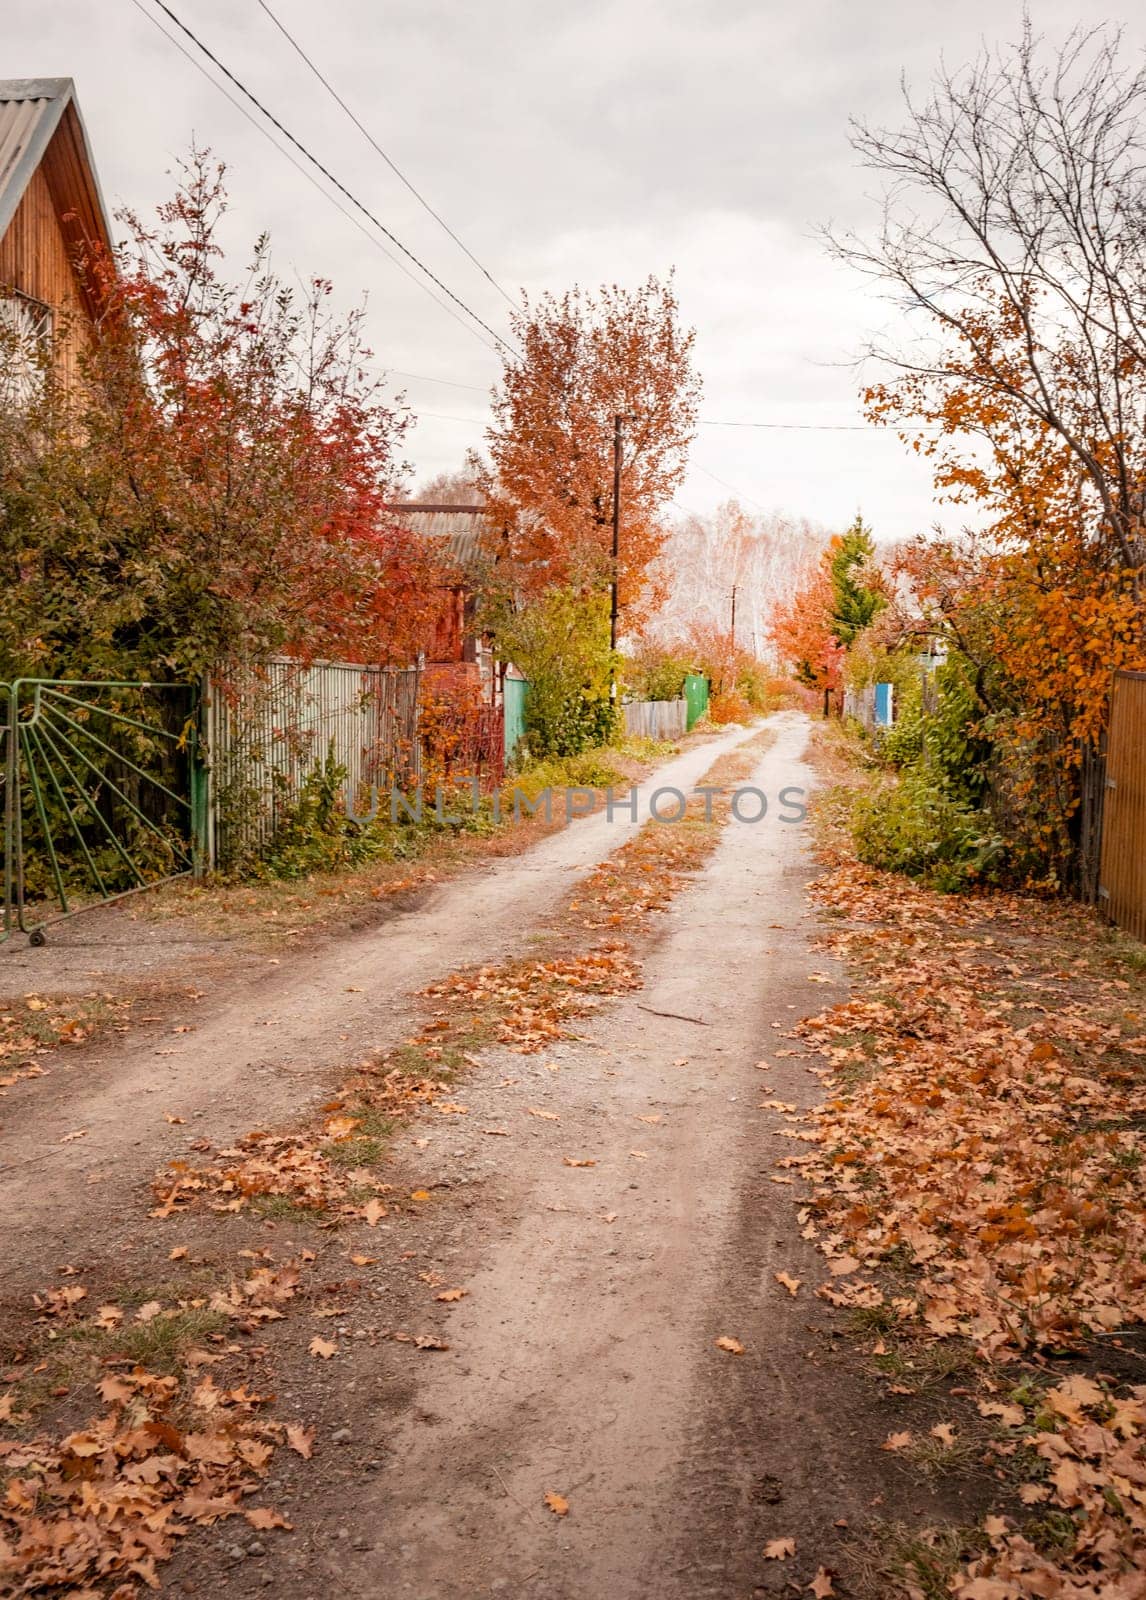 Rural road and fence, along village houses, with fallen autumn leaves and pillars, autumn landscape by claire_lucia